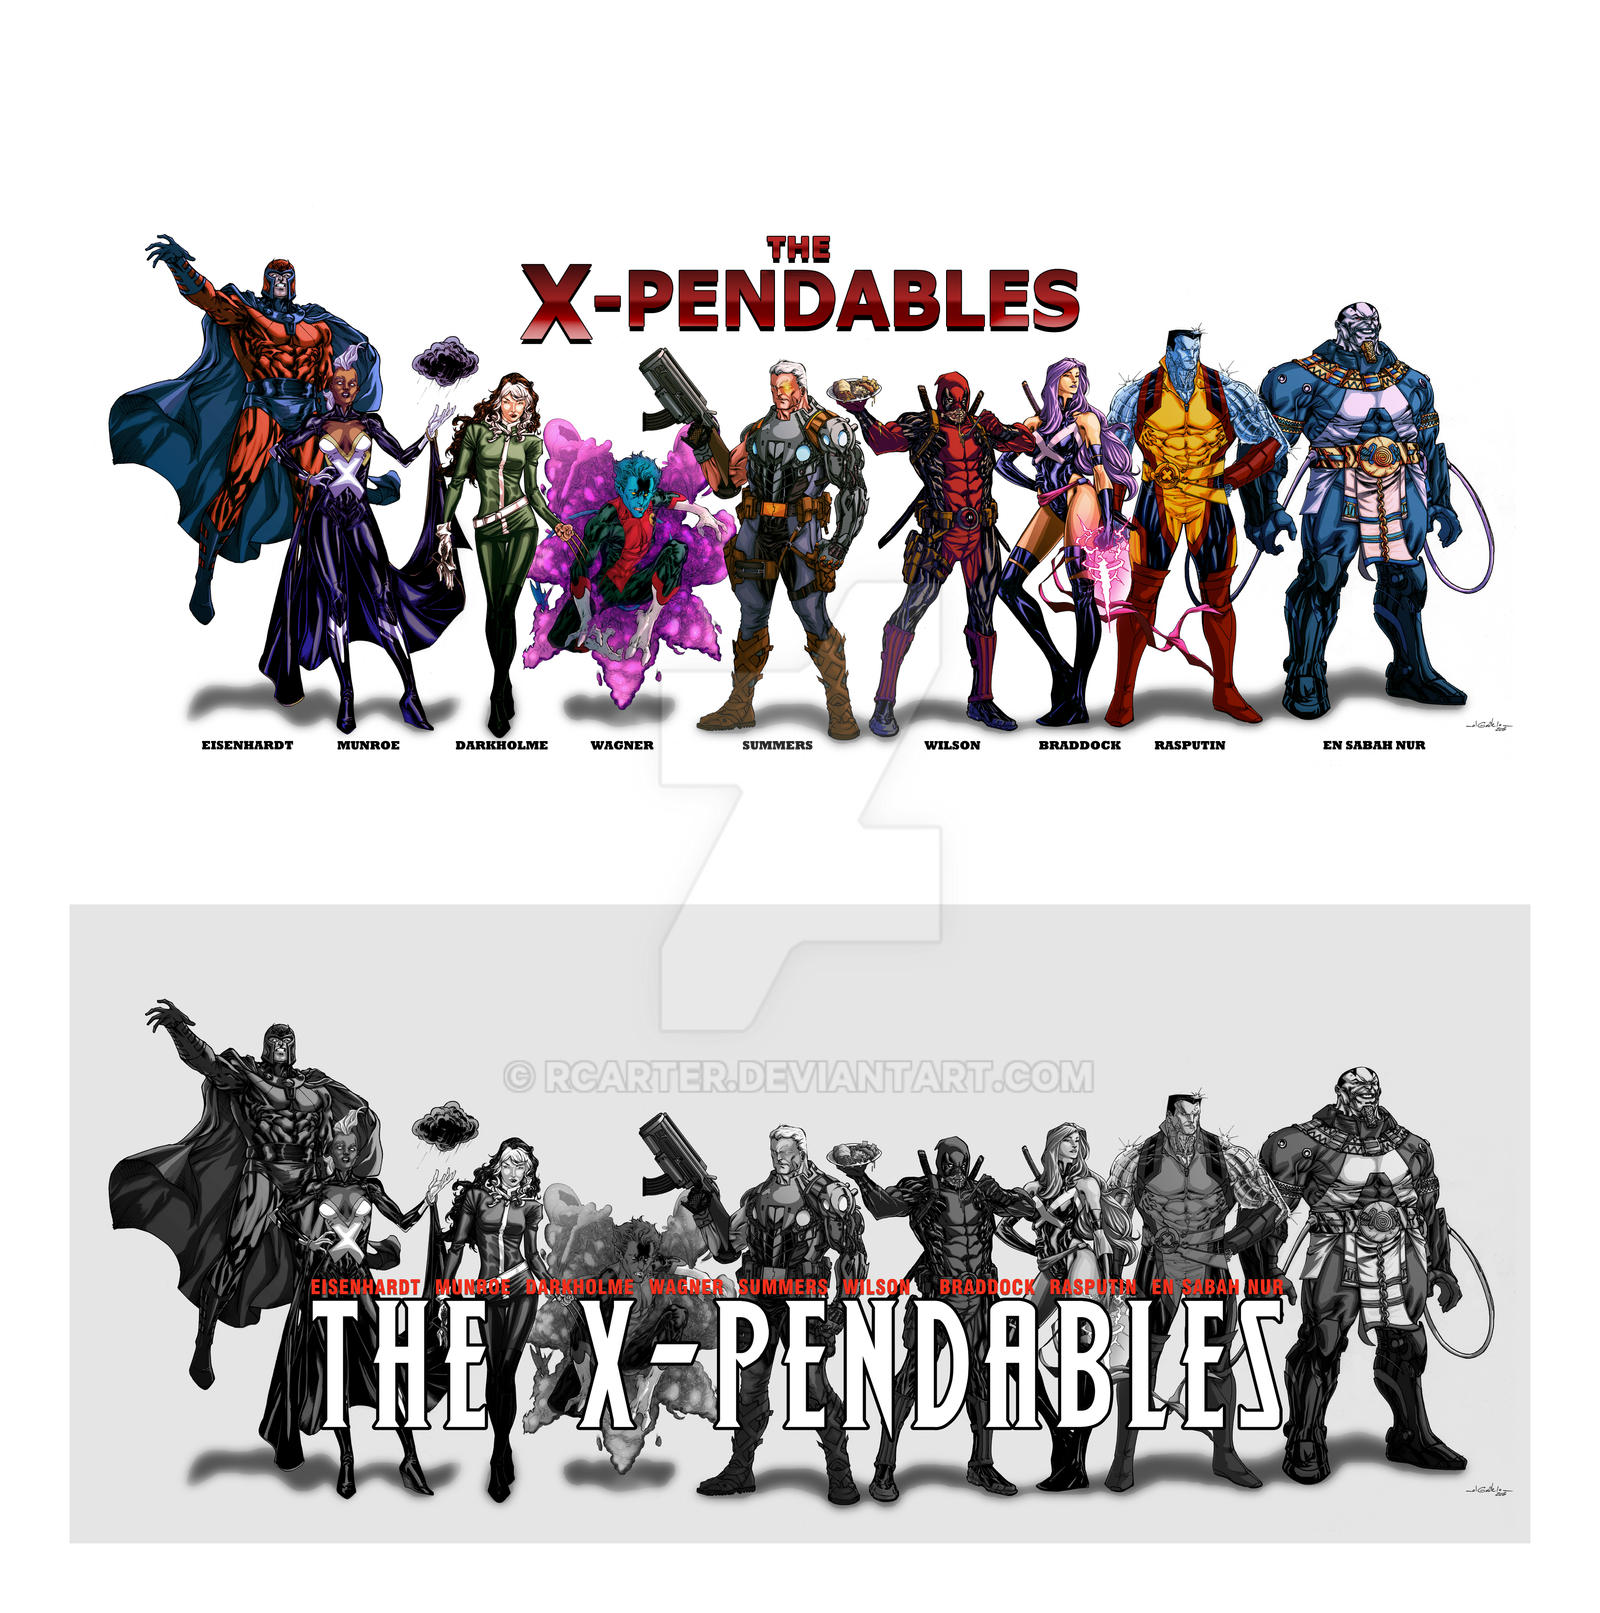 The X-Pendables